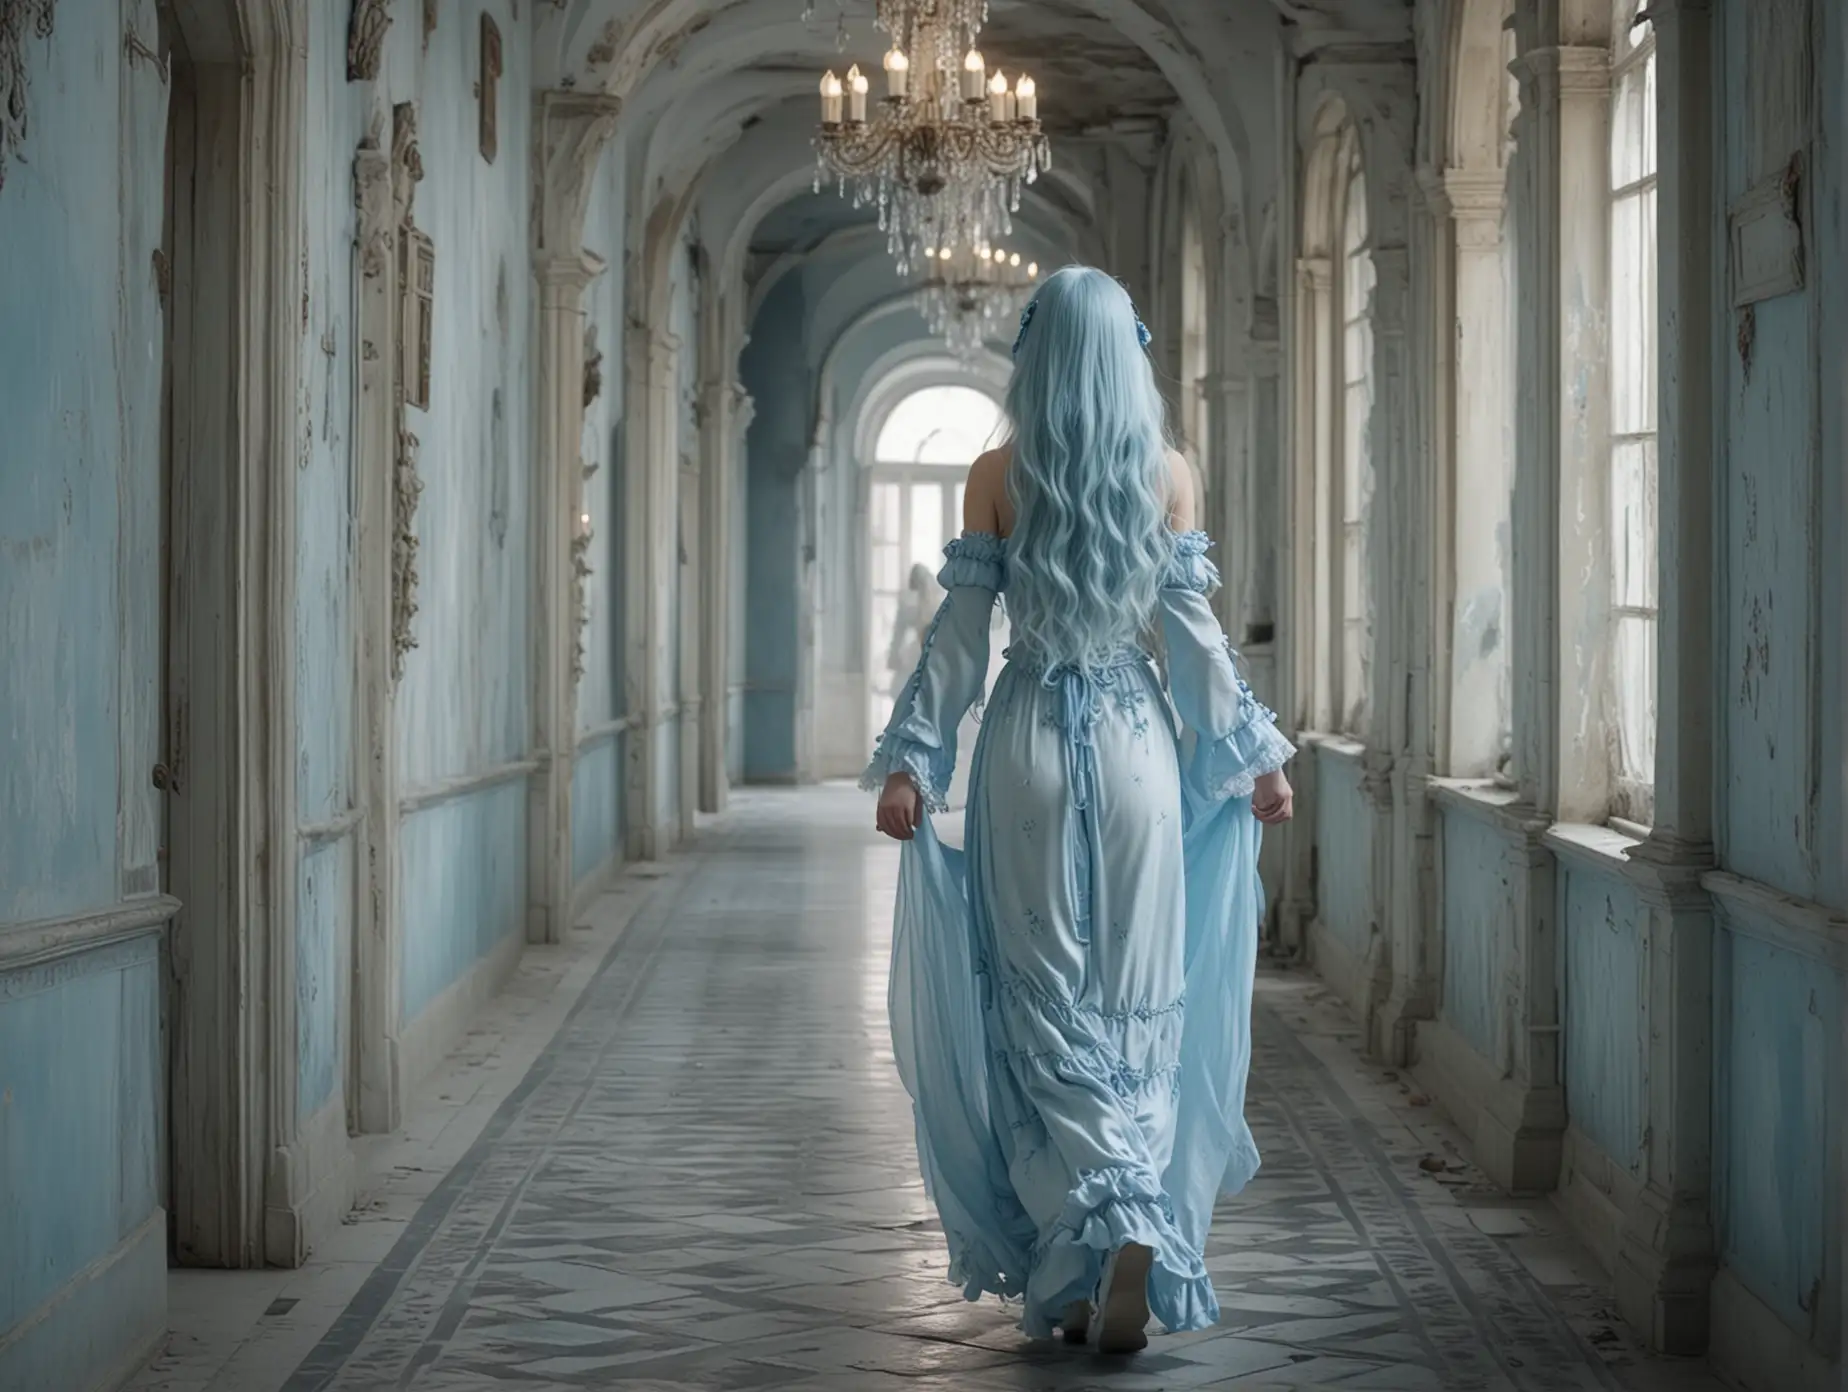 wearing a white and blue fancy dress, she has ice blue long hair, walking in the antique scented and complex corridor, 8k, high definition, resolution 1900*1080